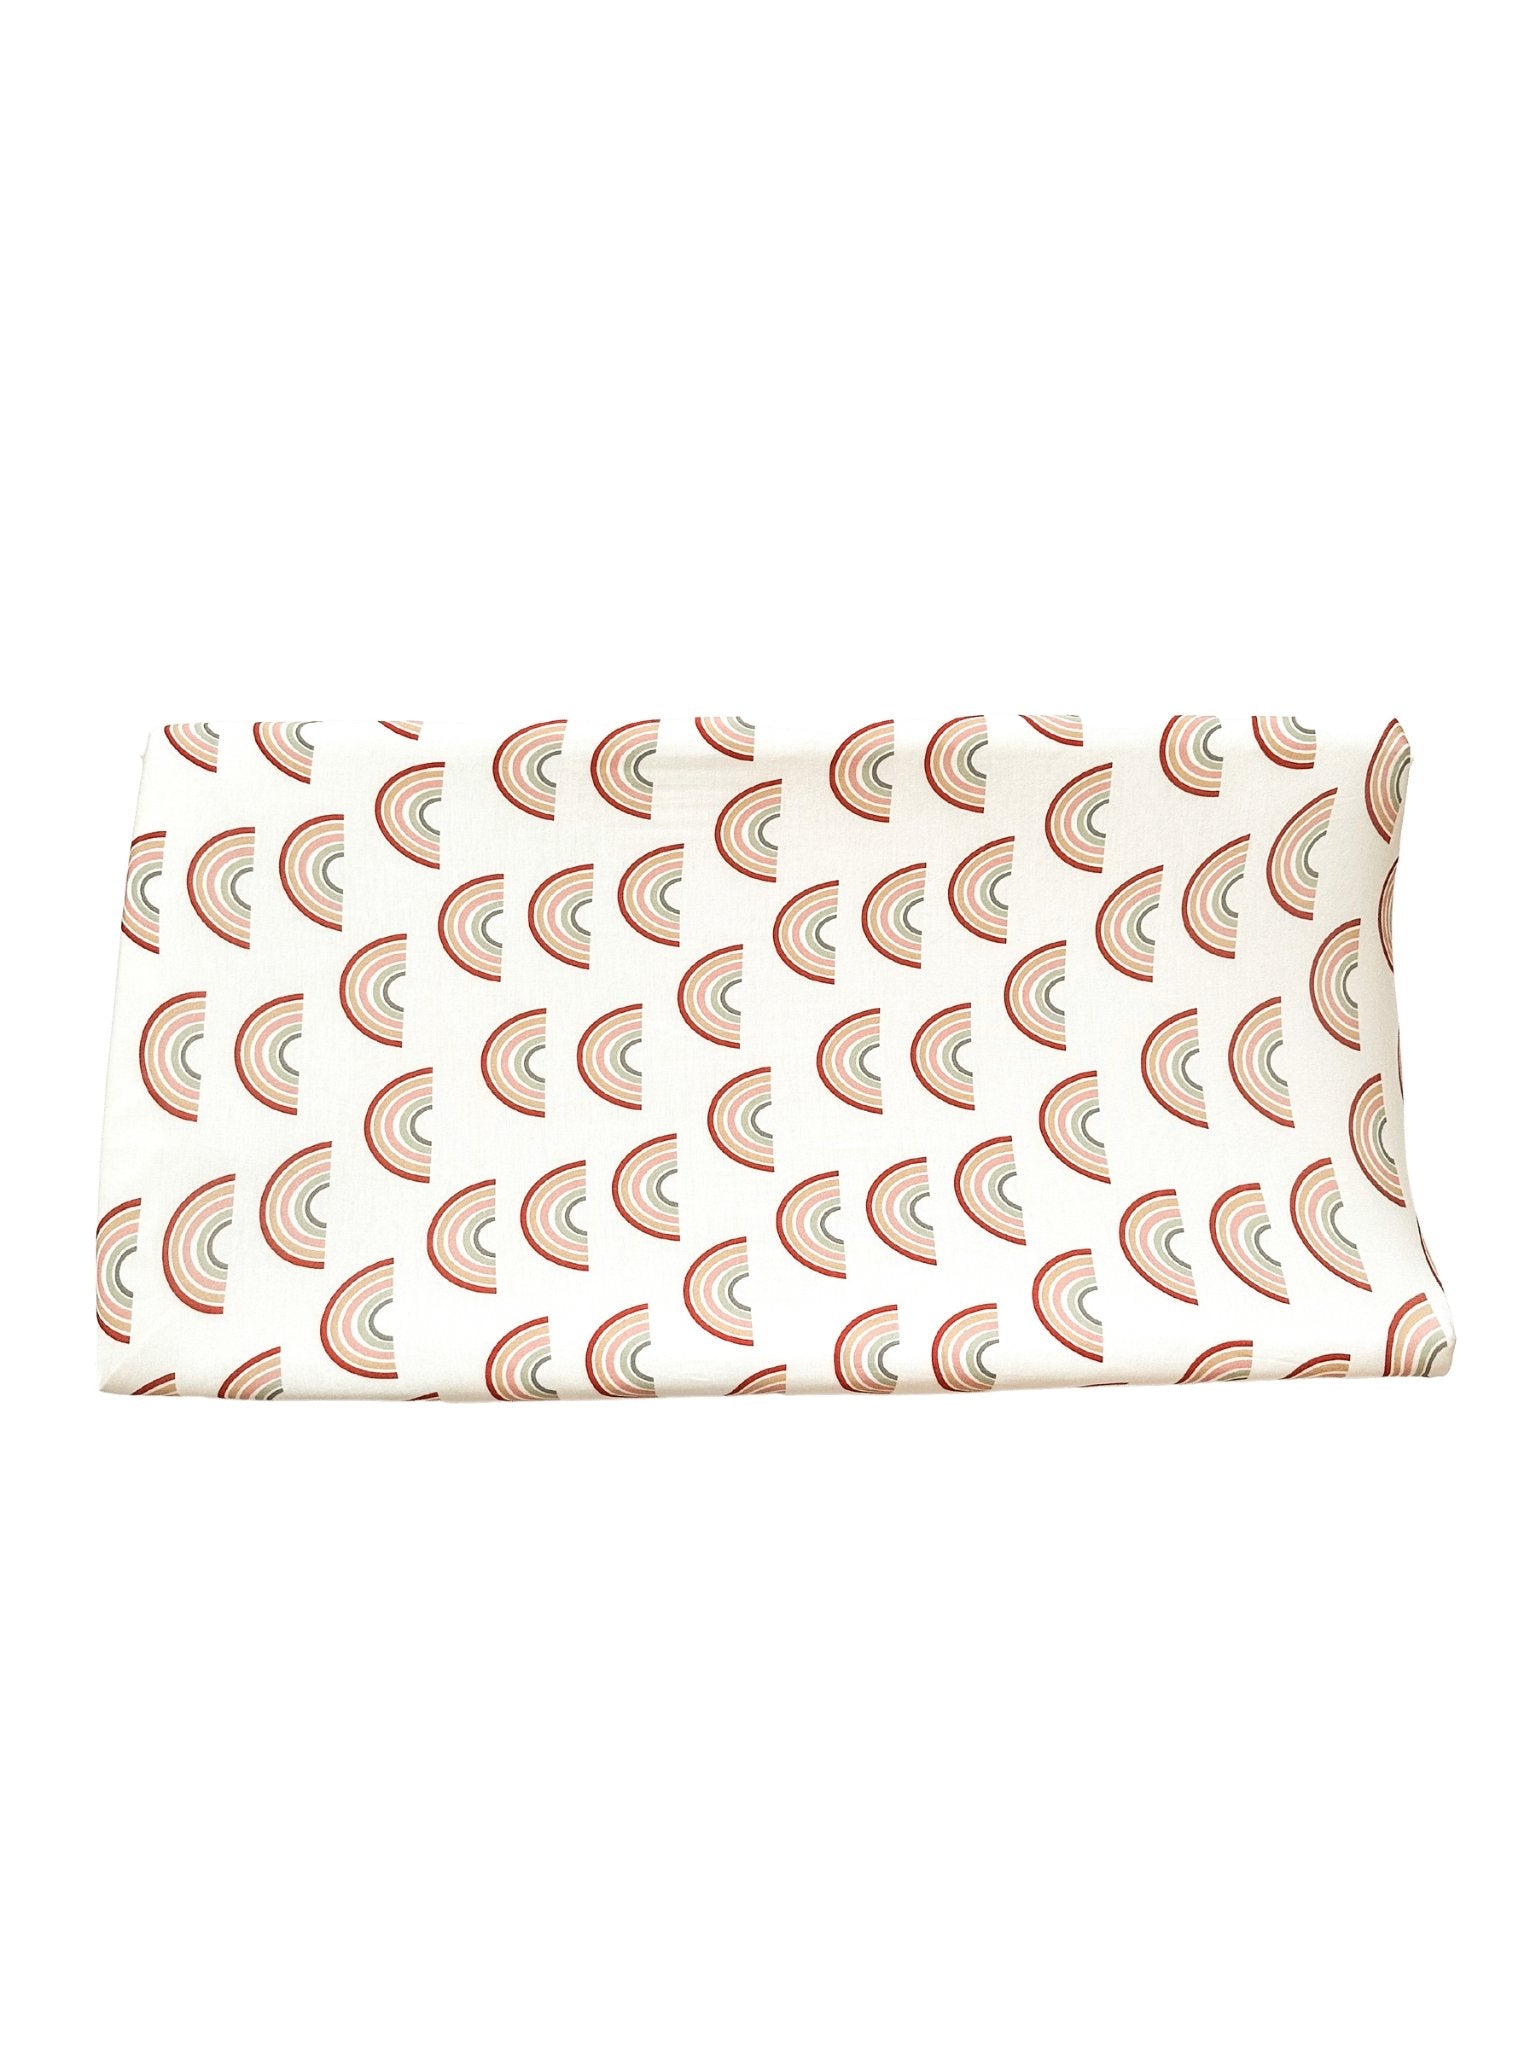 Bamboo Changing Pad Cover - Neutral Rainbow